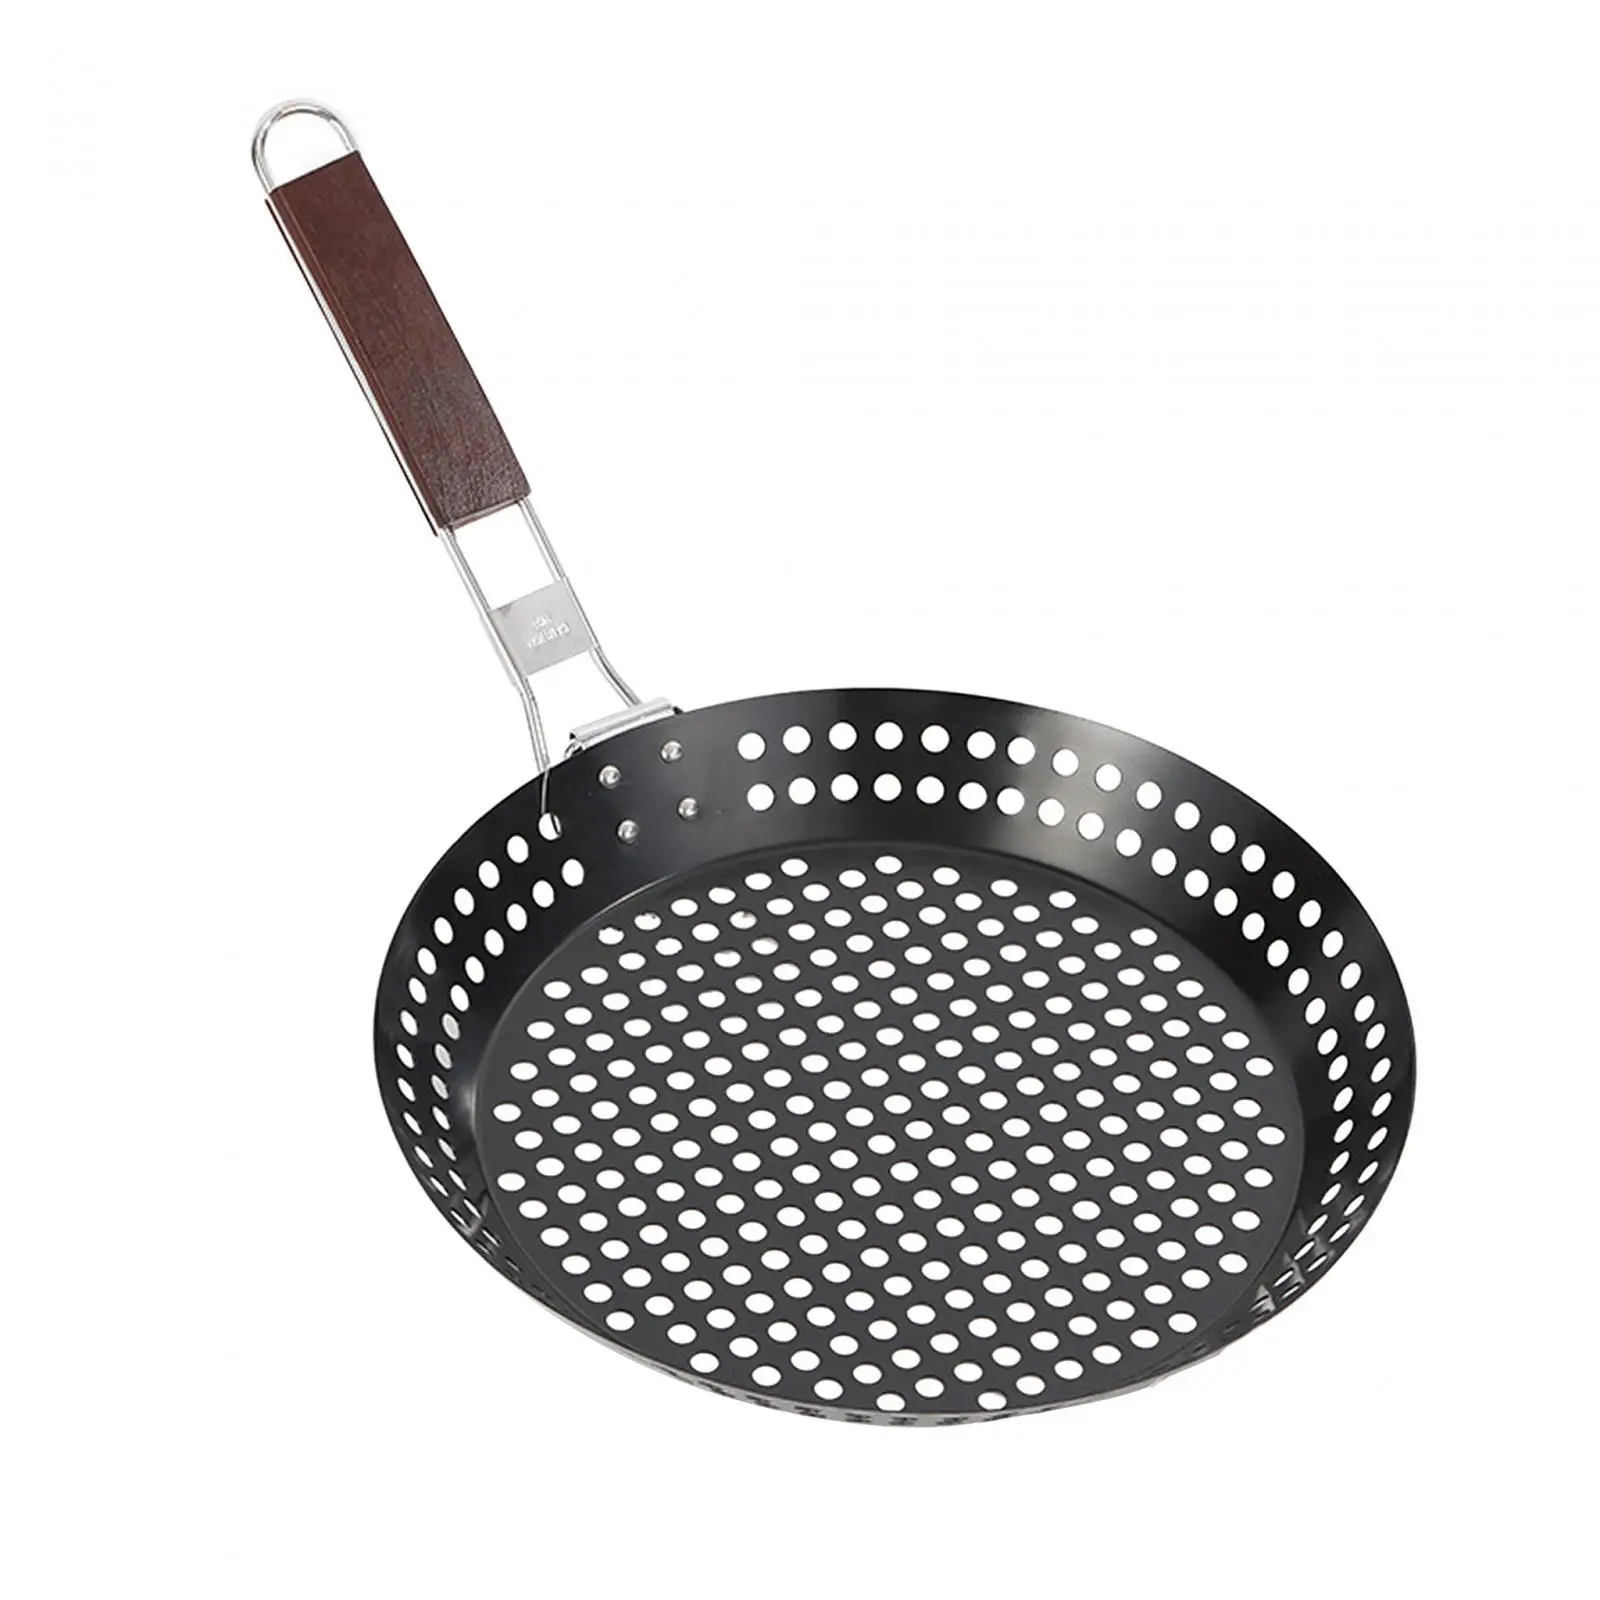 Grilling Skillet Round BBQ Griddle Roasting Cooking Outdoor Pan for Kitchen Utensils Outdoor Indoor Cooking Backpacking Home